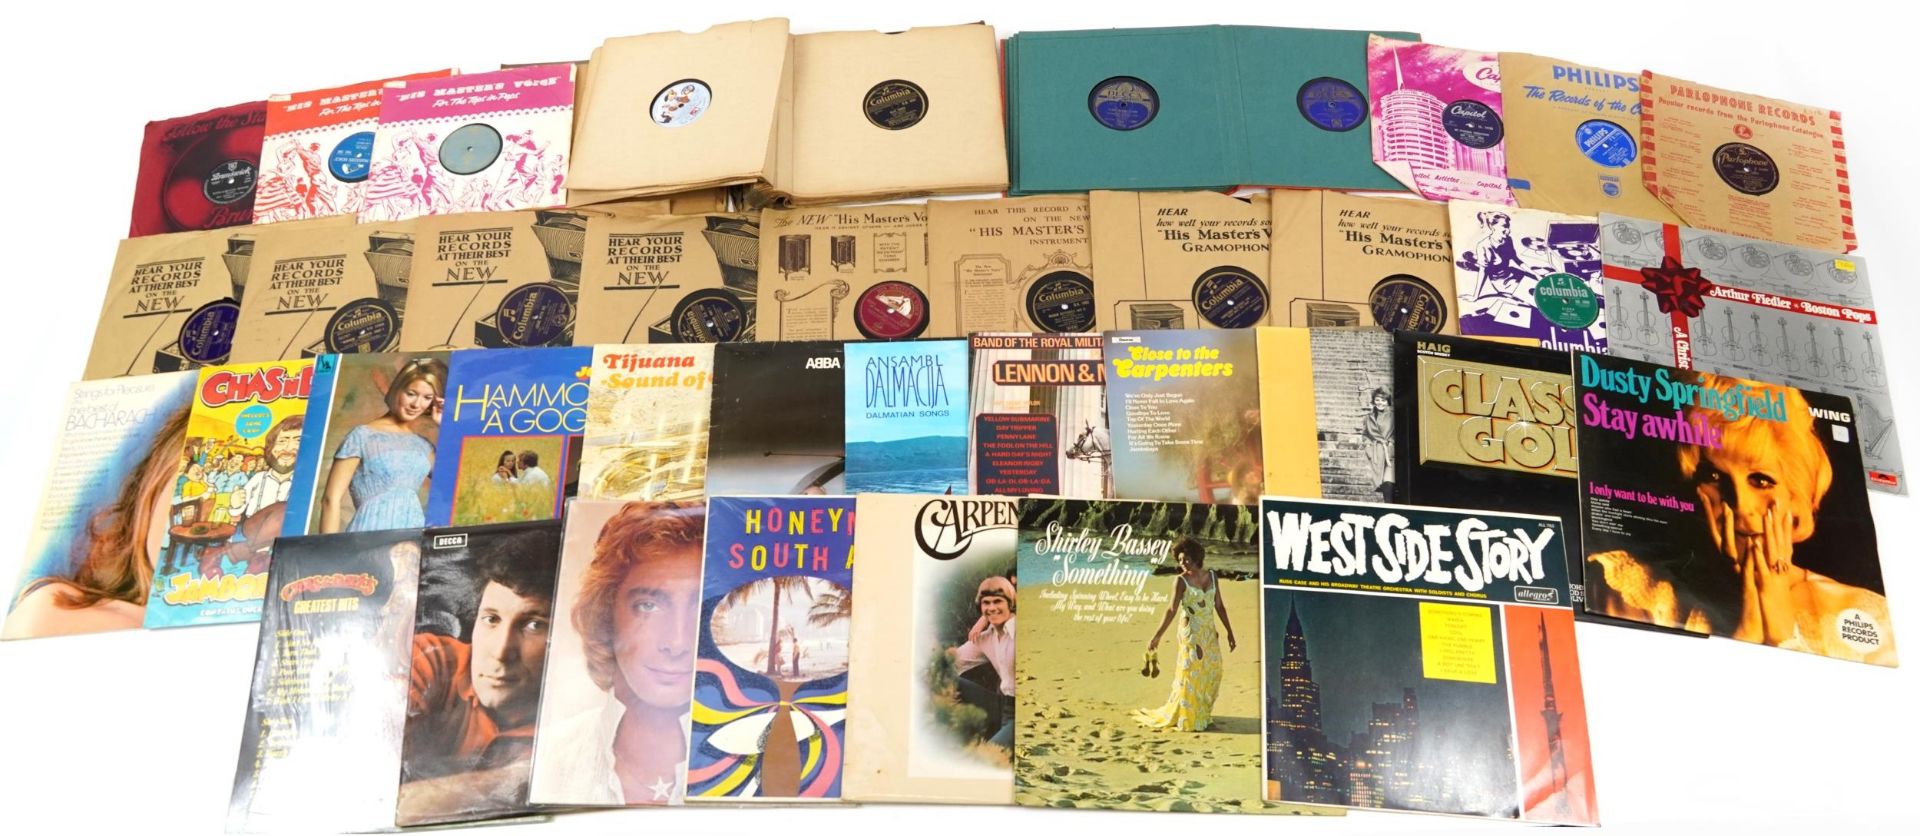 Vinyl LPs and 78s including Abba, Chas & Dave, James Last, Lennon & McCartney, Carpenters and Tom - Image 2 of 3